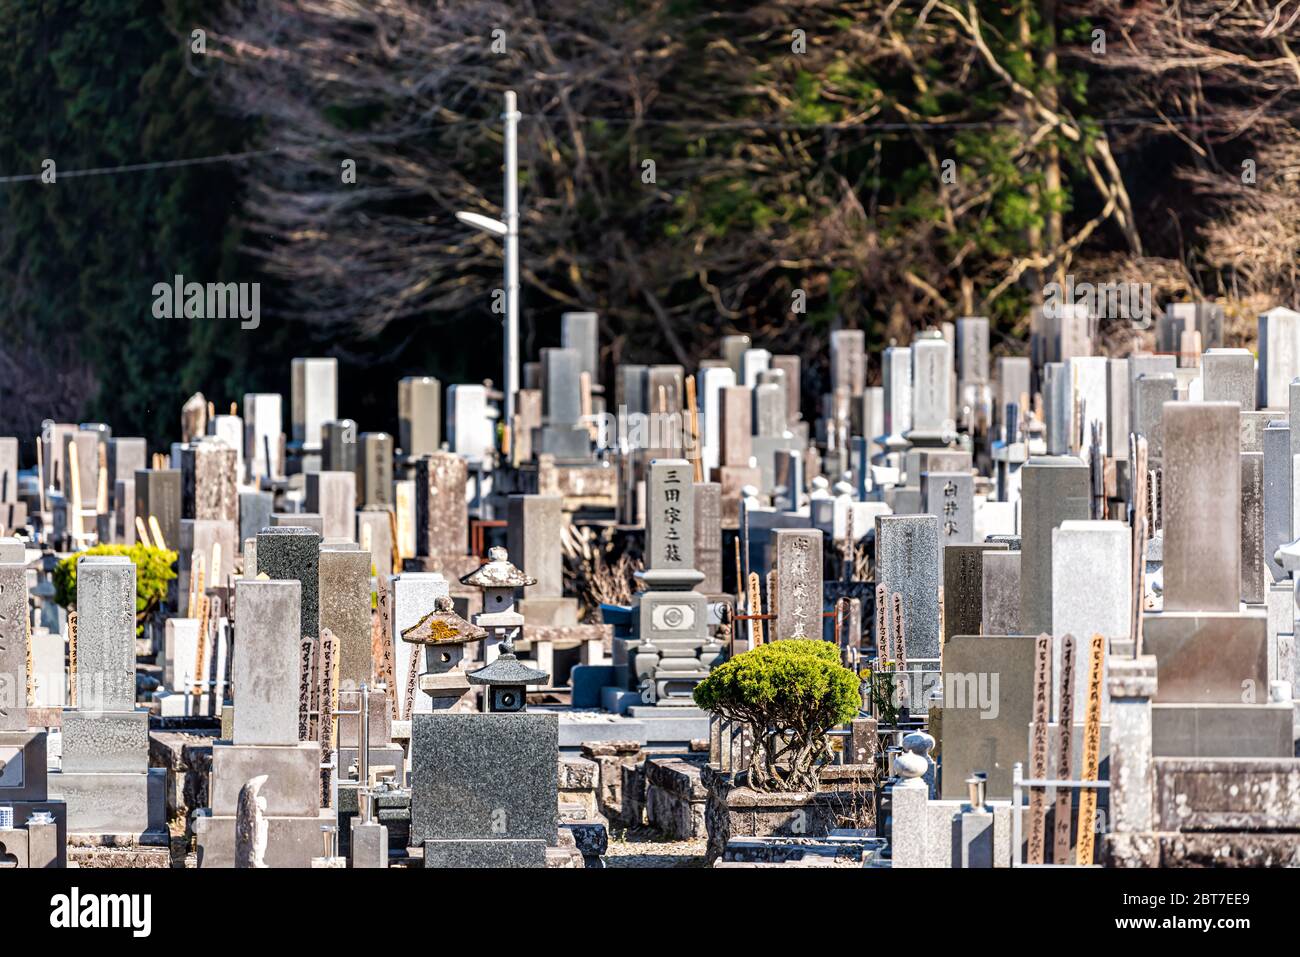 Nikko, Japan - April 5, 2019: Tochigi prefecture town city with cemetery and many stone graves in graveyard tombstones during day Stock Photo